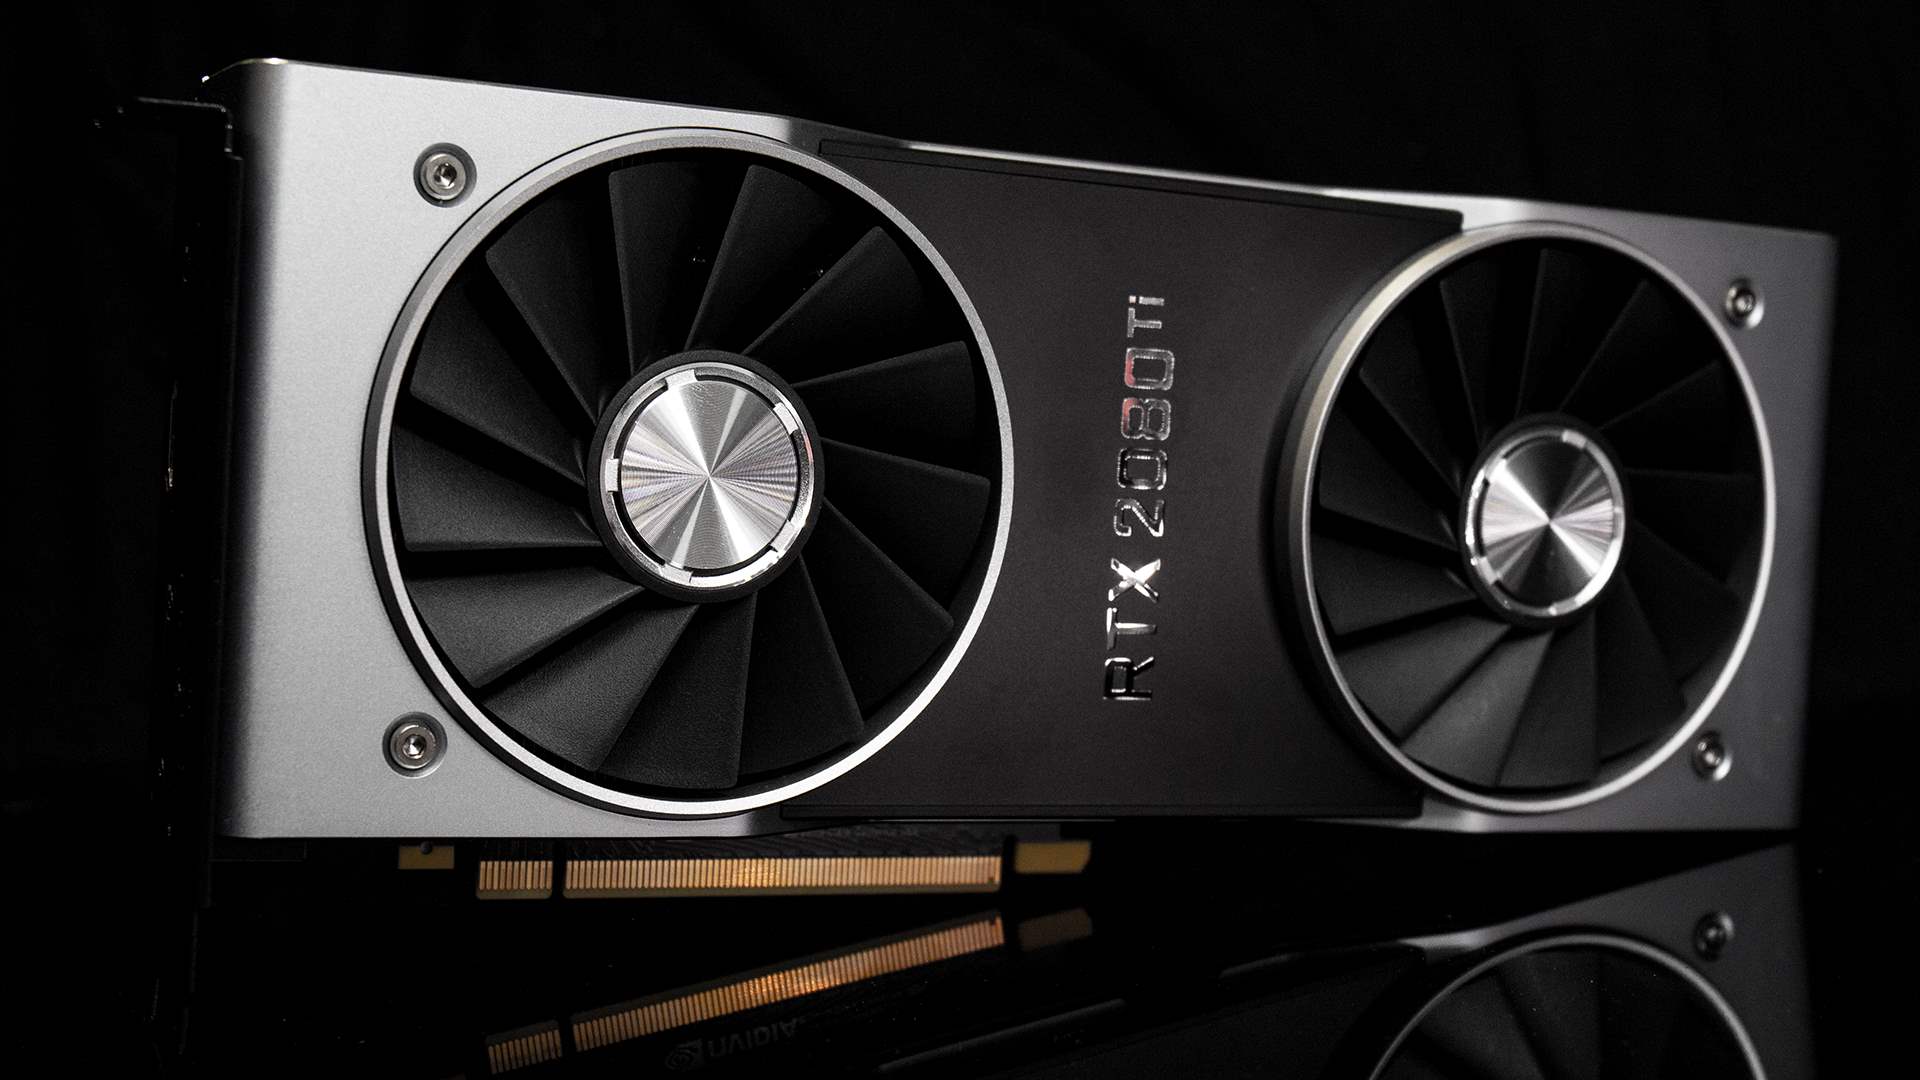 Nvidia GeForce RTX 2080 Ti review: the fastest gaming card around